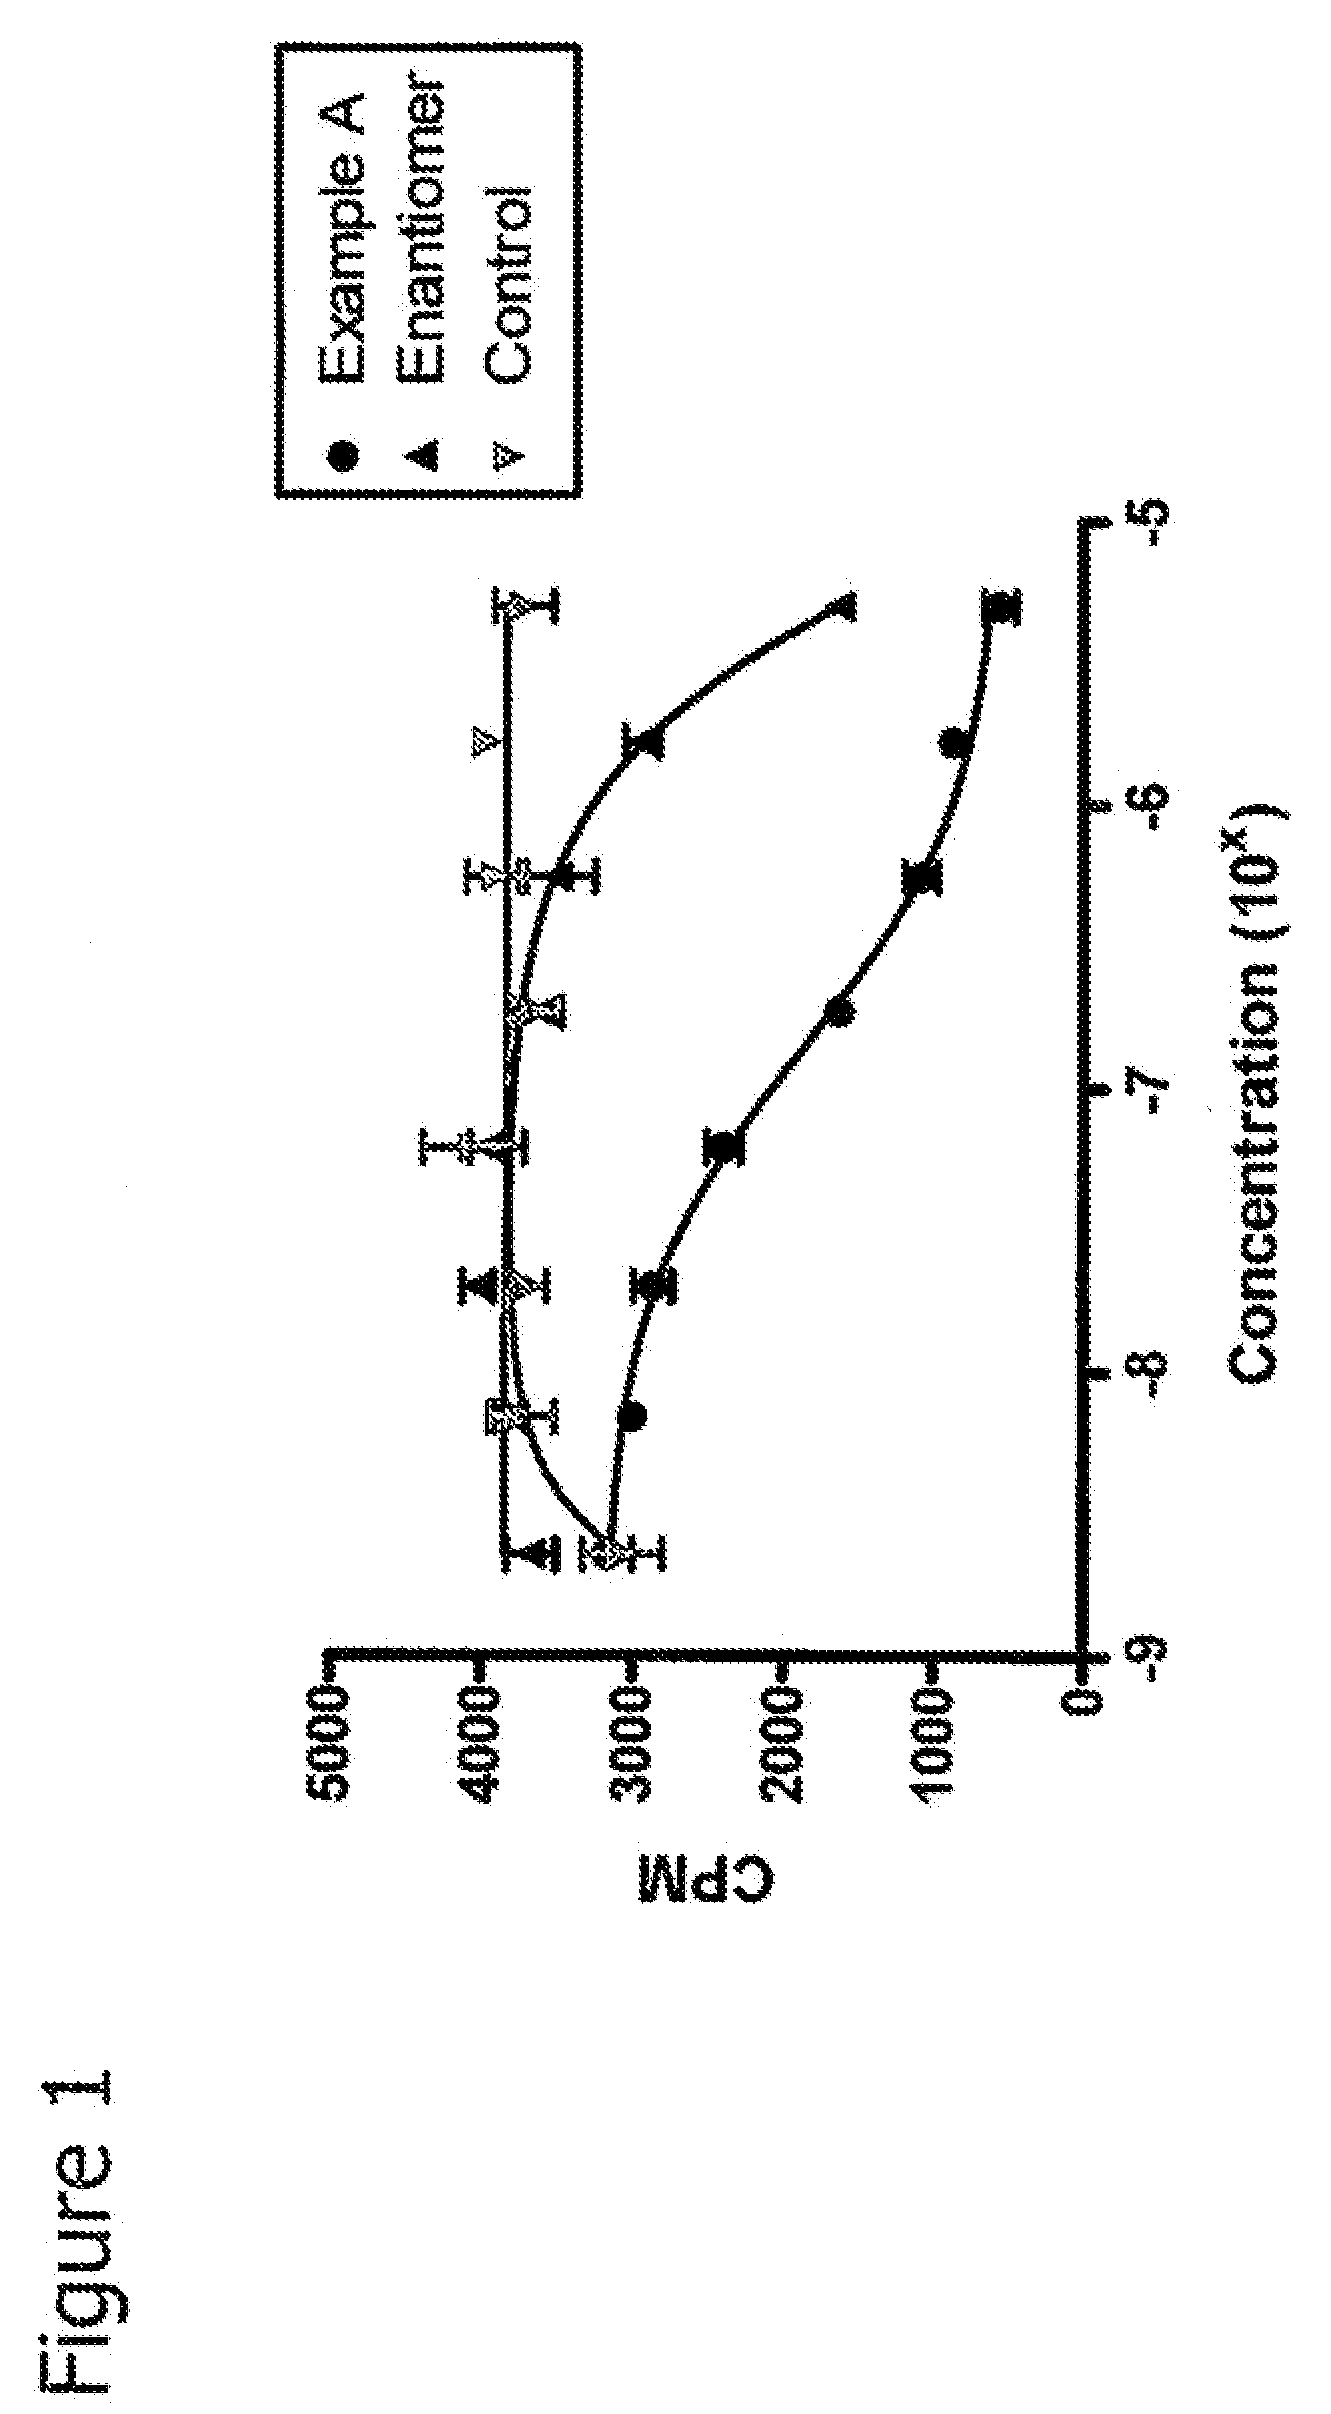 Method of preventing or treating organ, hematopoietic stem cell or bone marrow transplant rejection